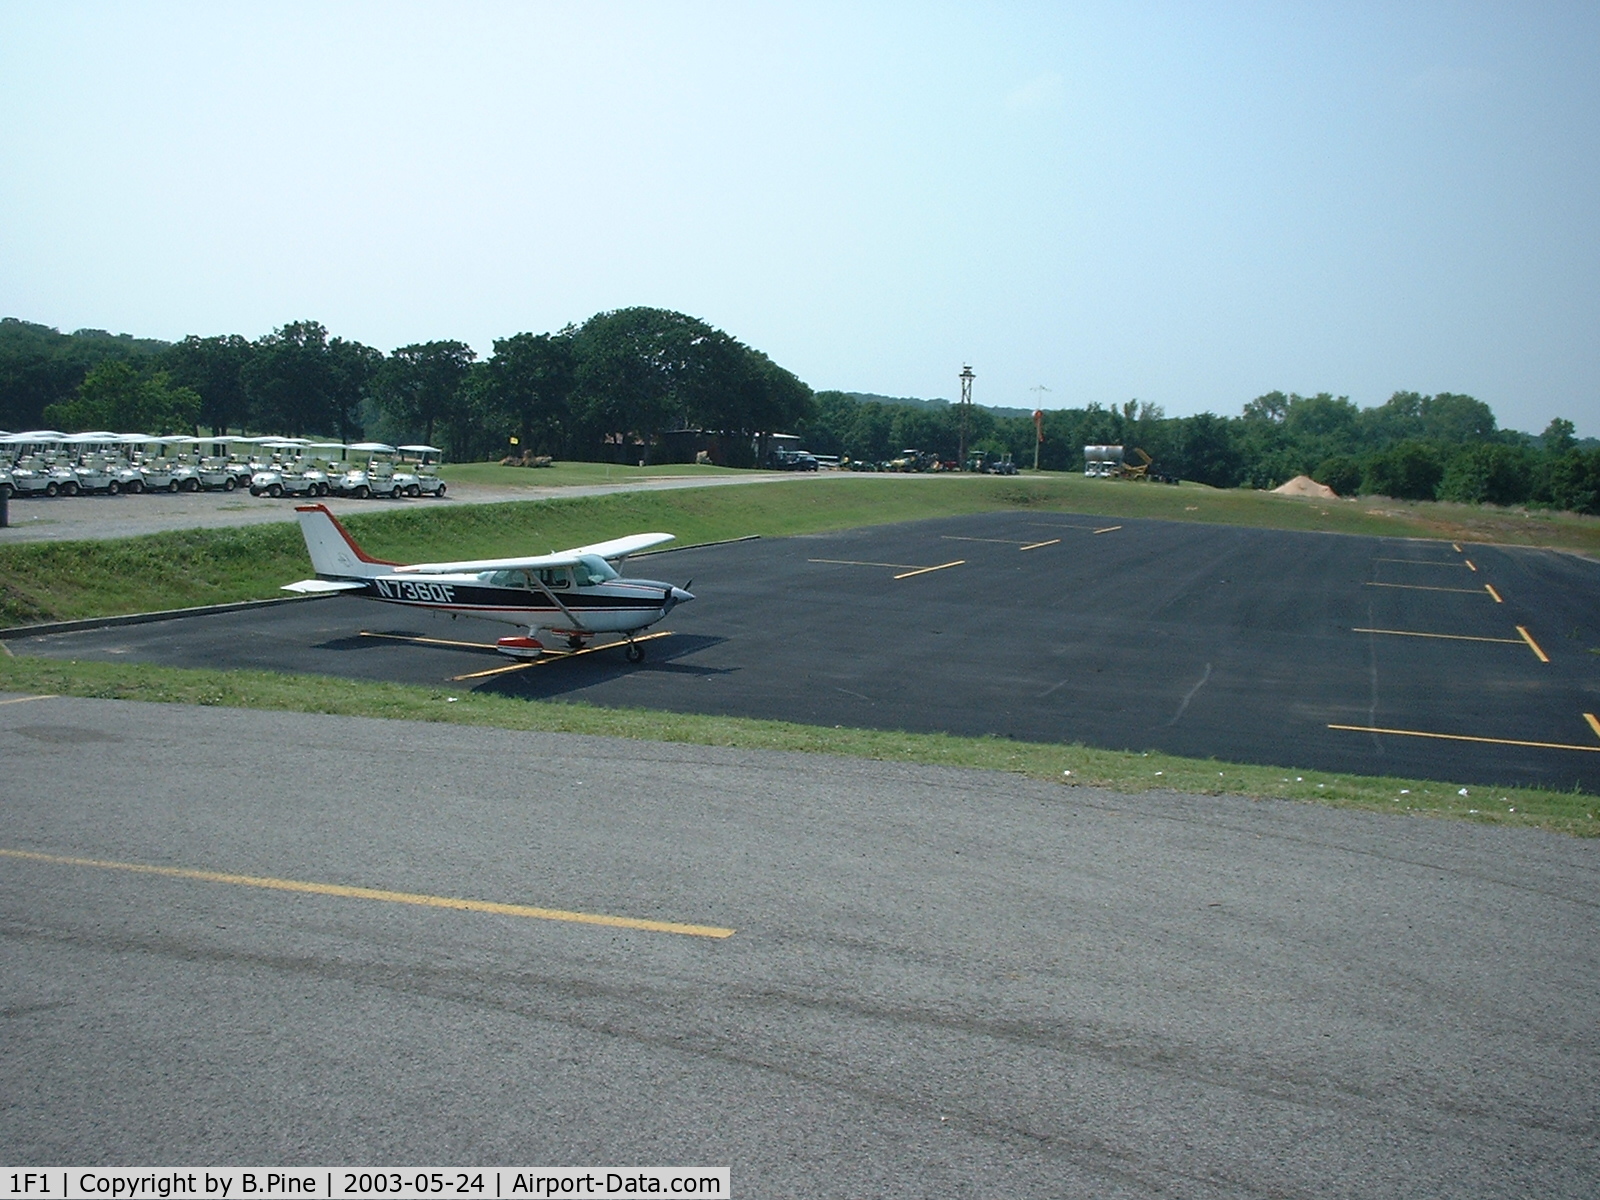 Lake Murray State Park Airport (1F1) - Airplane Parking